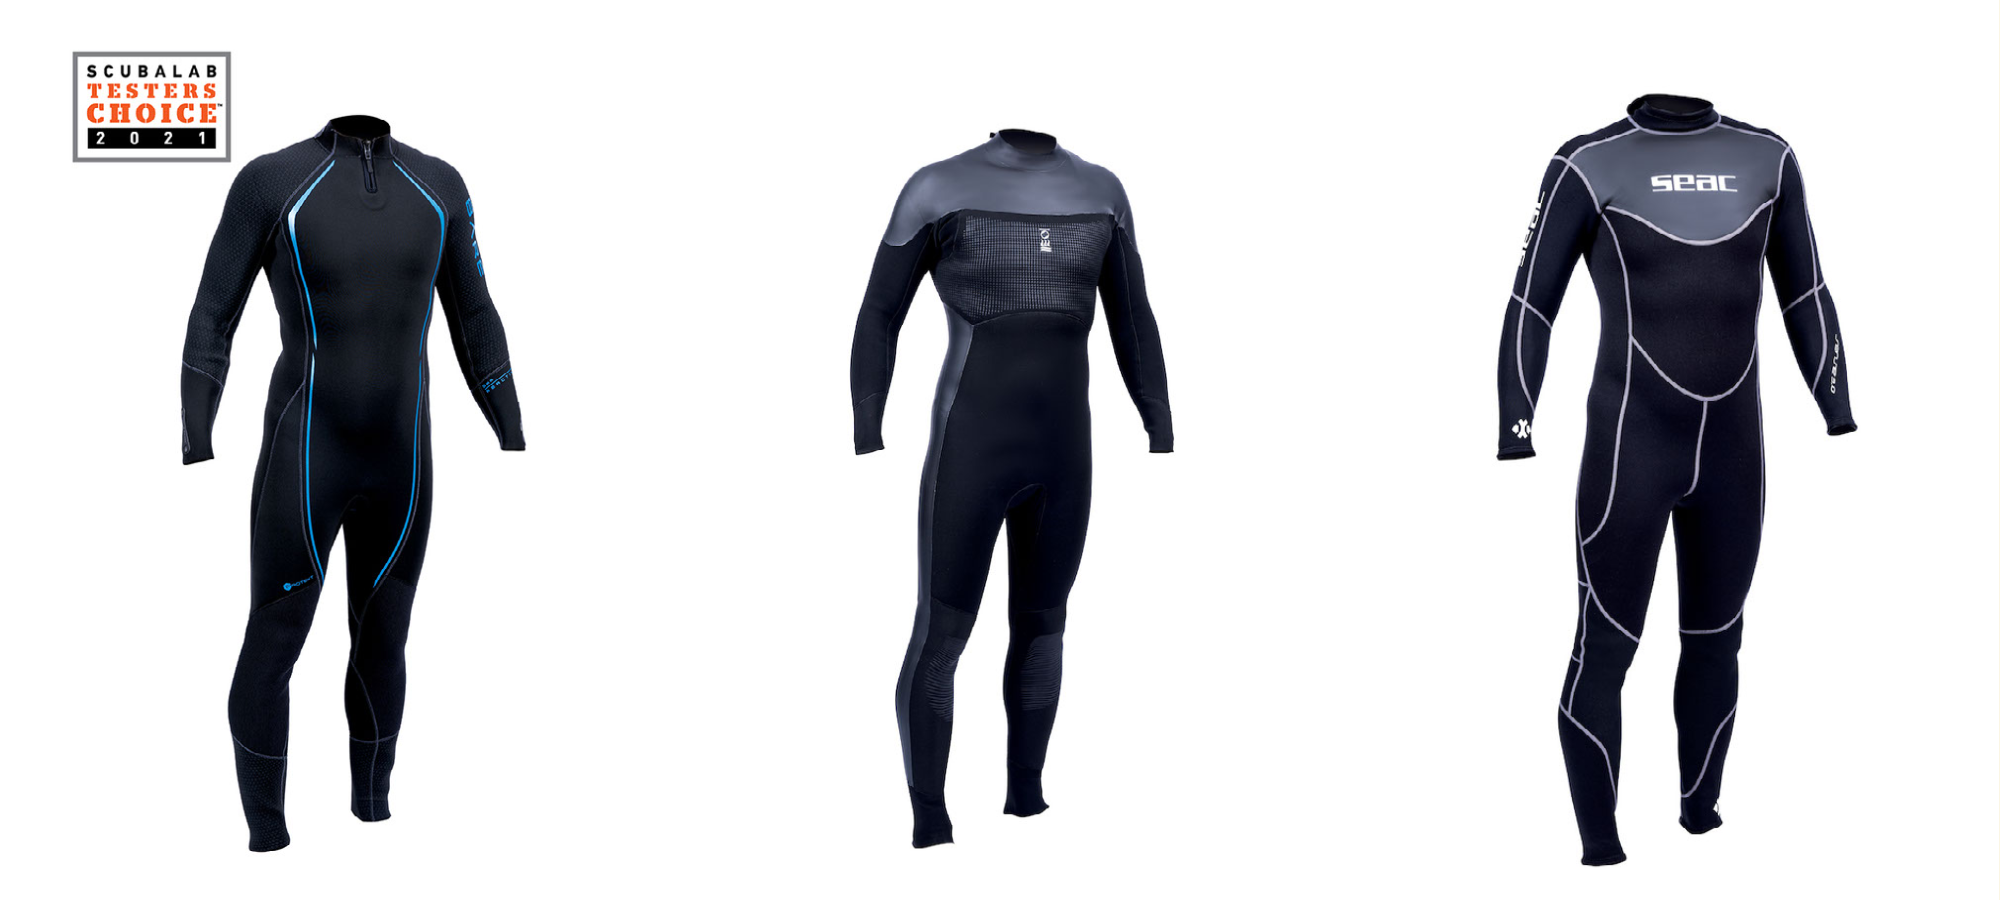 Wetsuit thickness and water temperature - Wetsuits - Spearfishing World  forum